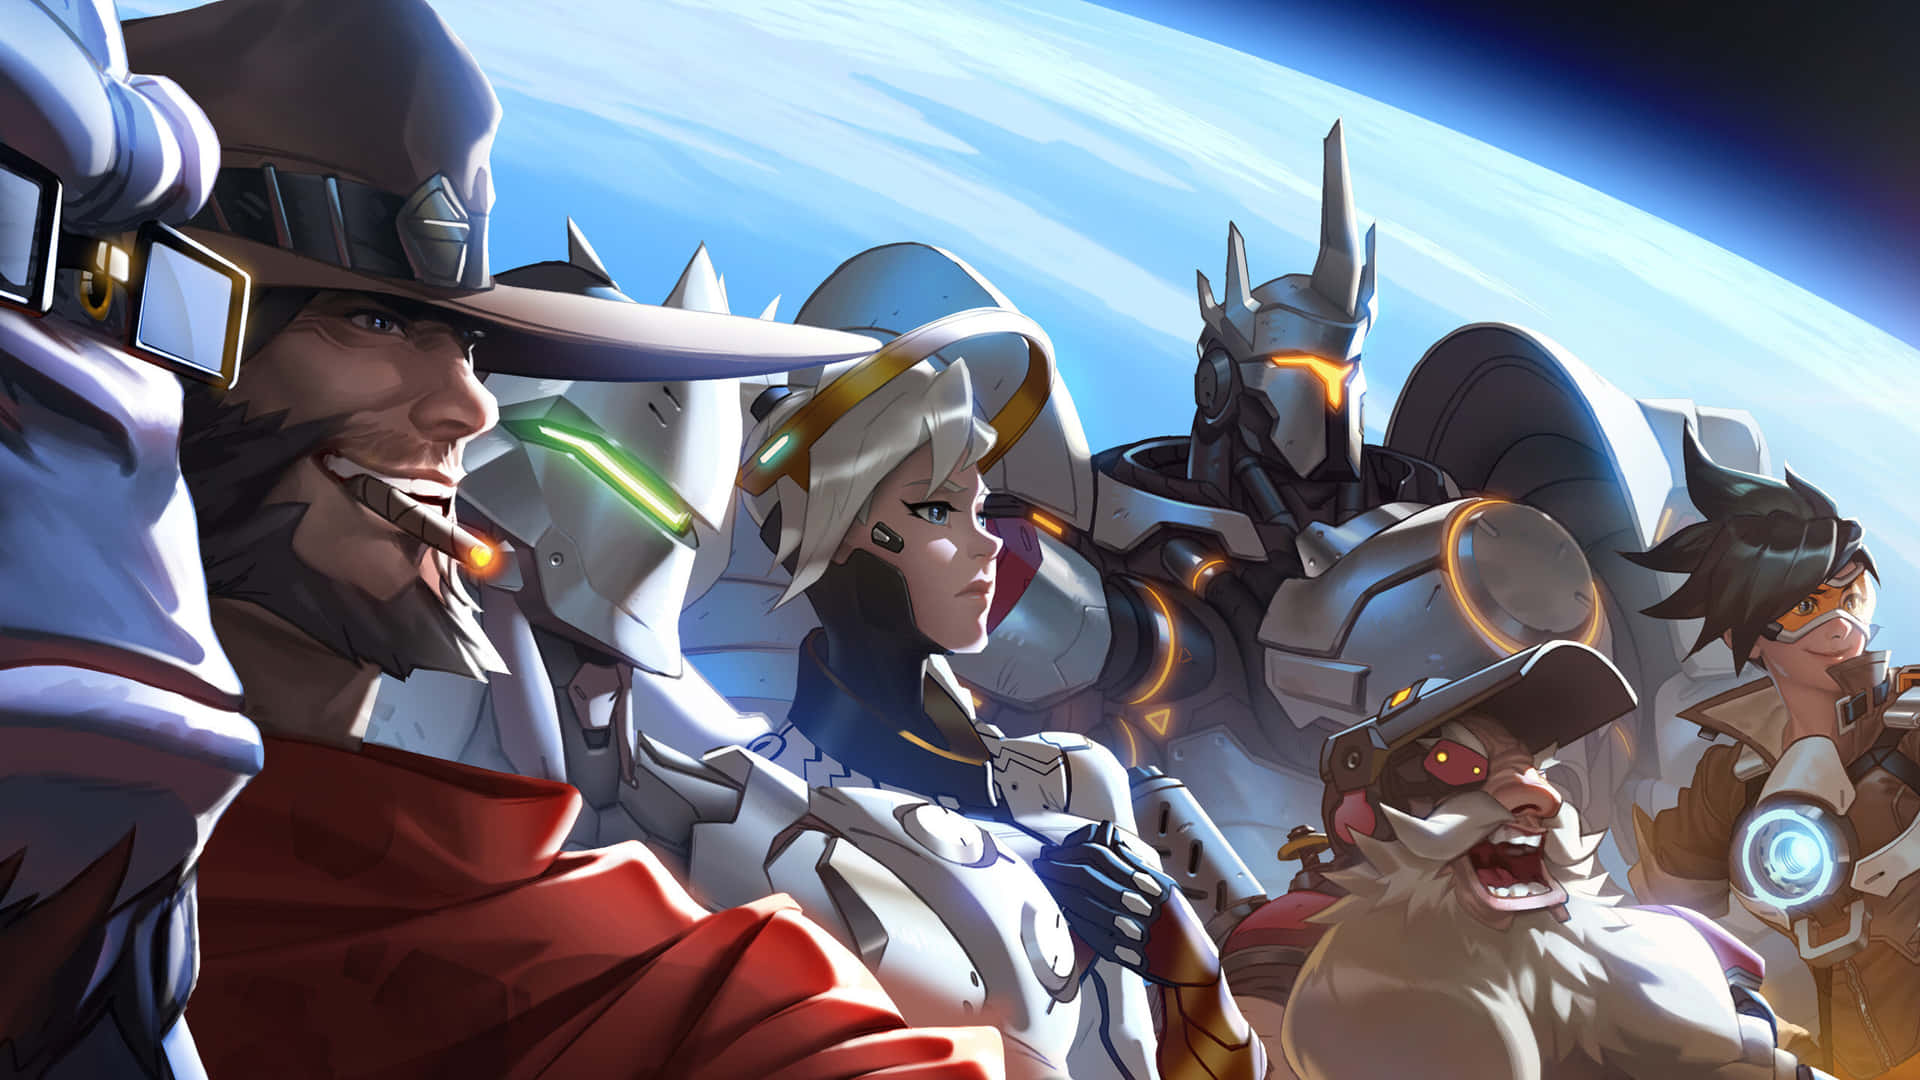 Aesthetic Overwatch Gaming Action Wallpaper